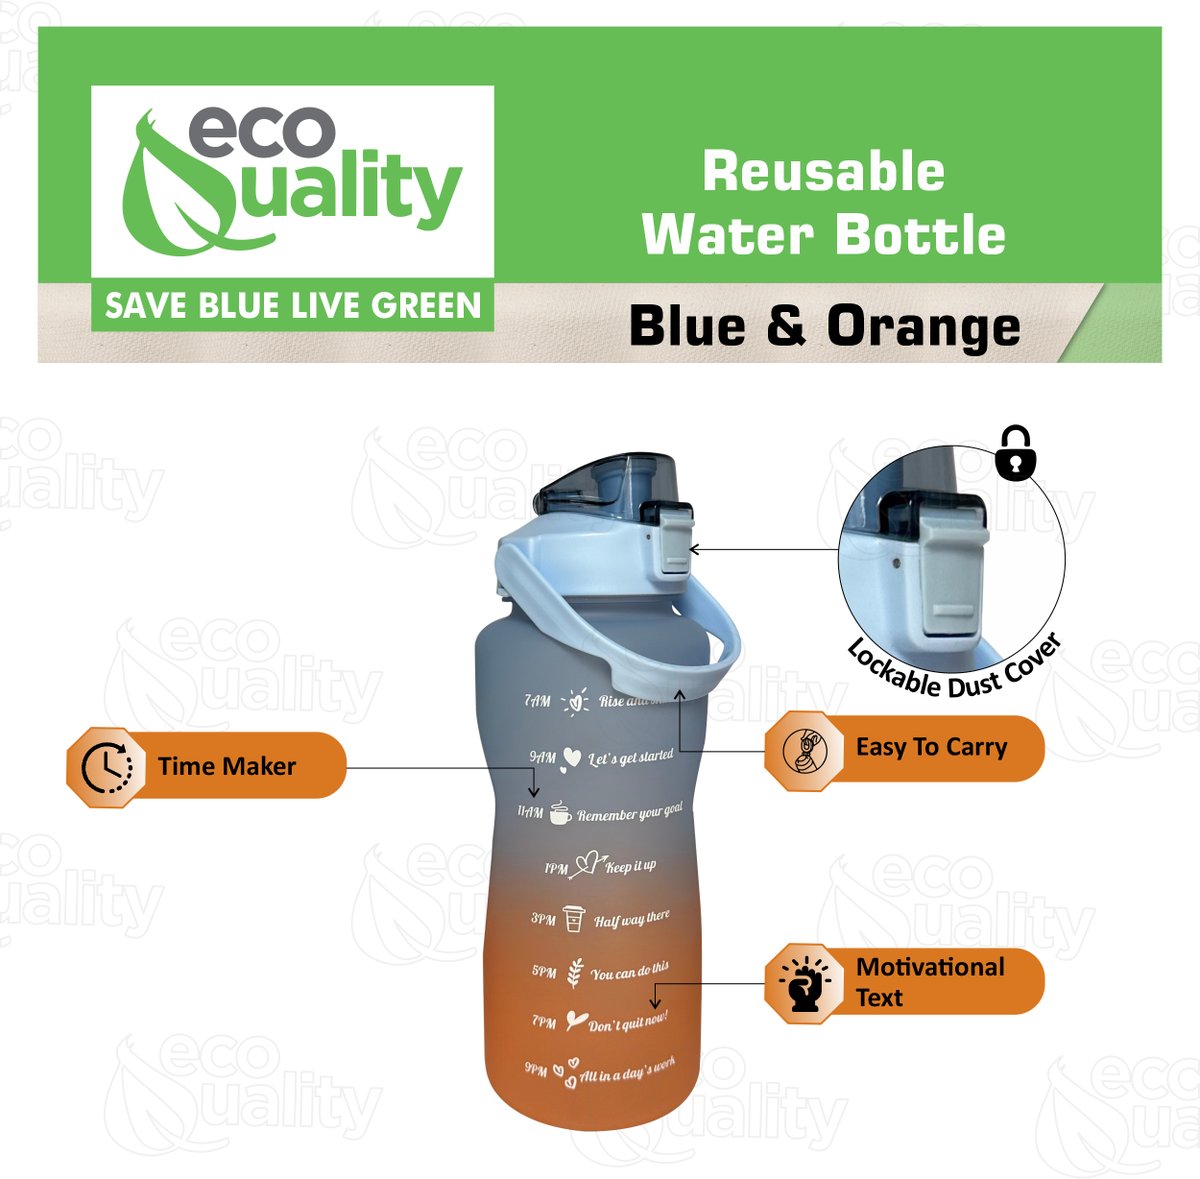 Sip Responsibly with EcoQuality's Reusable Water Bottles!
#ecoquality #waterbottle #watercontainers #fitness #reusablewaterbottle #reusable #hydrate #restaurantsupplier #nycrestaurantsupplier #disposableproducts #workout #activities #ecofriendly #reuse #recycle  #colddrinks